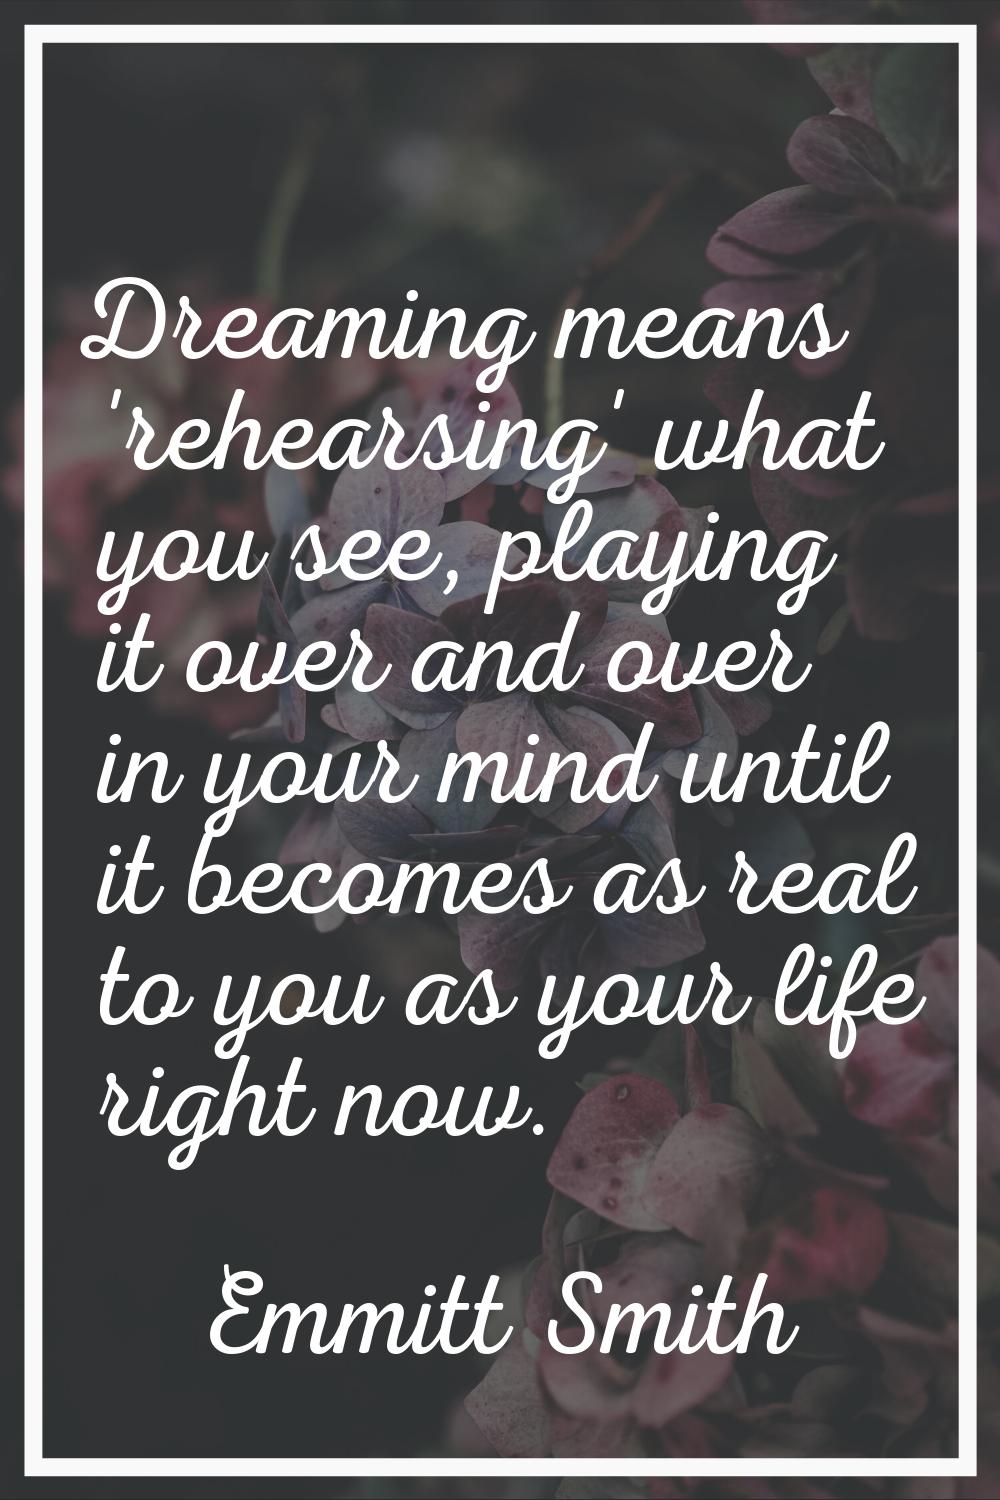 Dreaming means 'rehearsing' what you see, playing it over and over in your mind until it becomes as